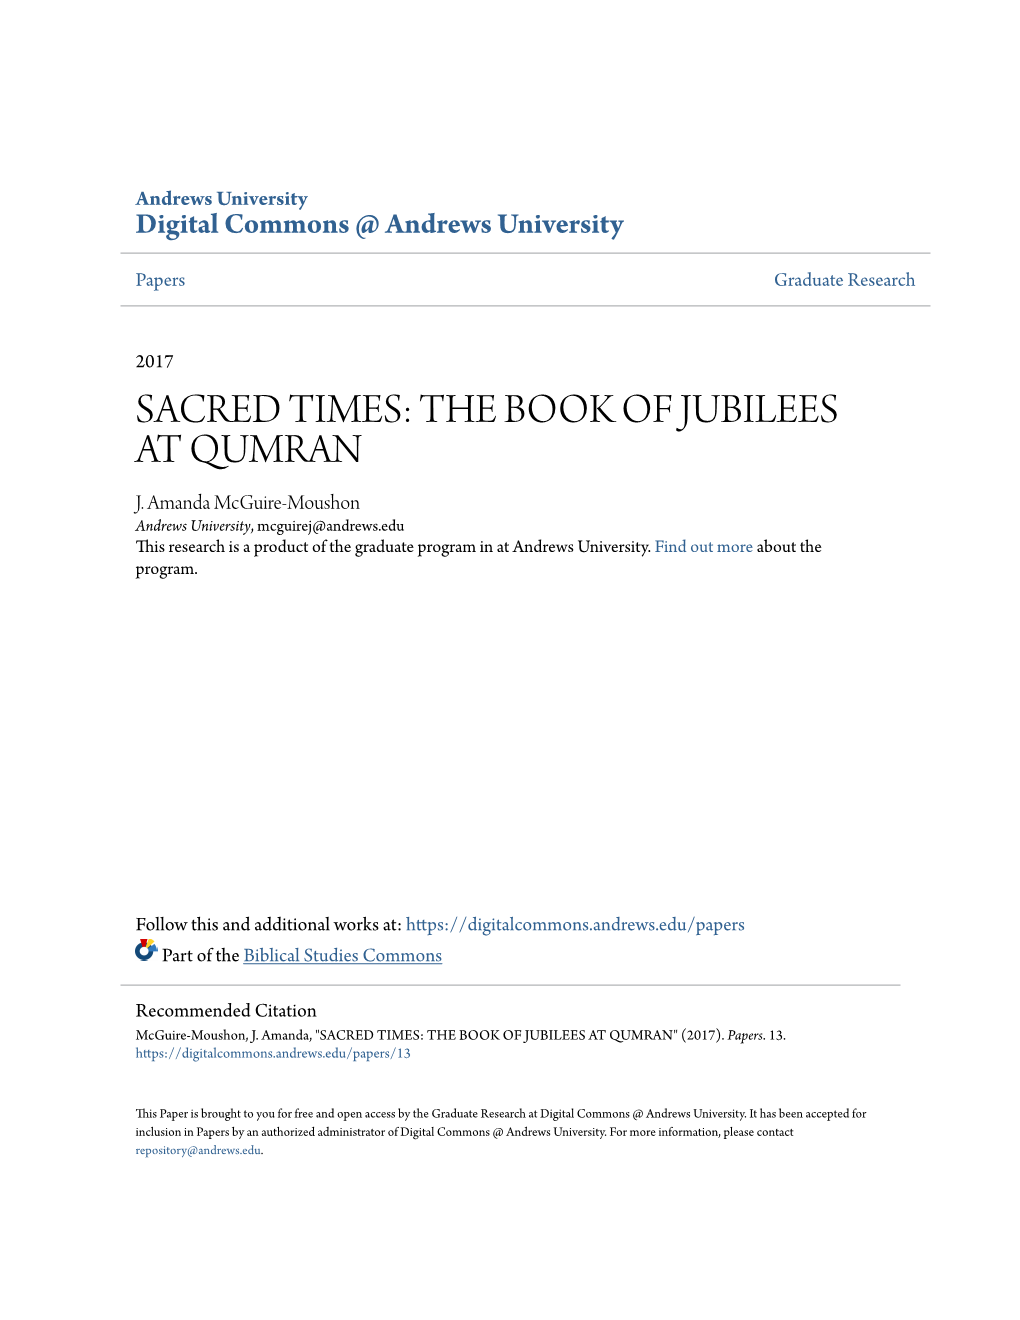 Sacred Times: the Book of Jubilees at Qumran J